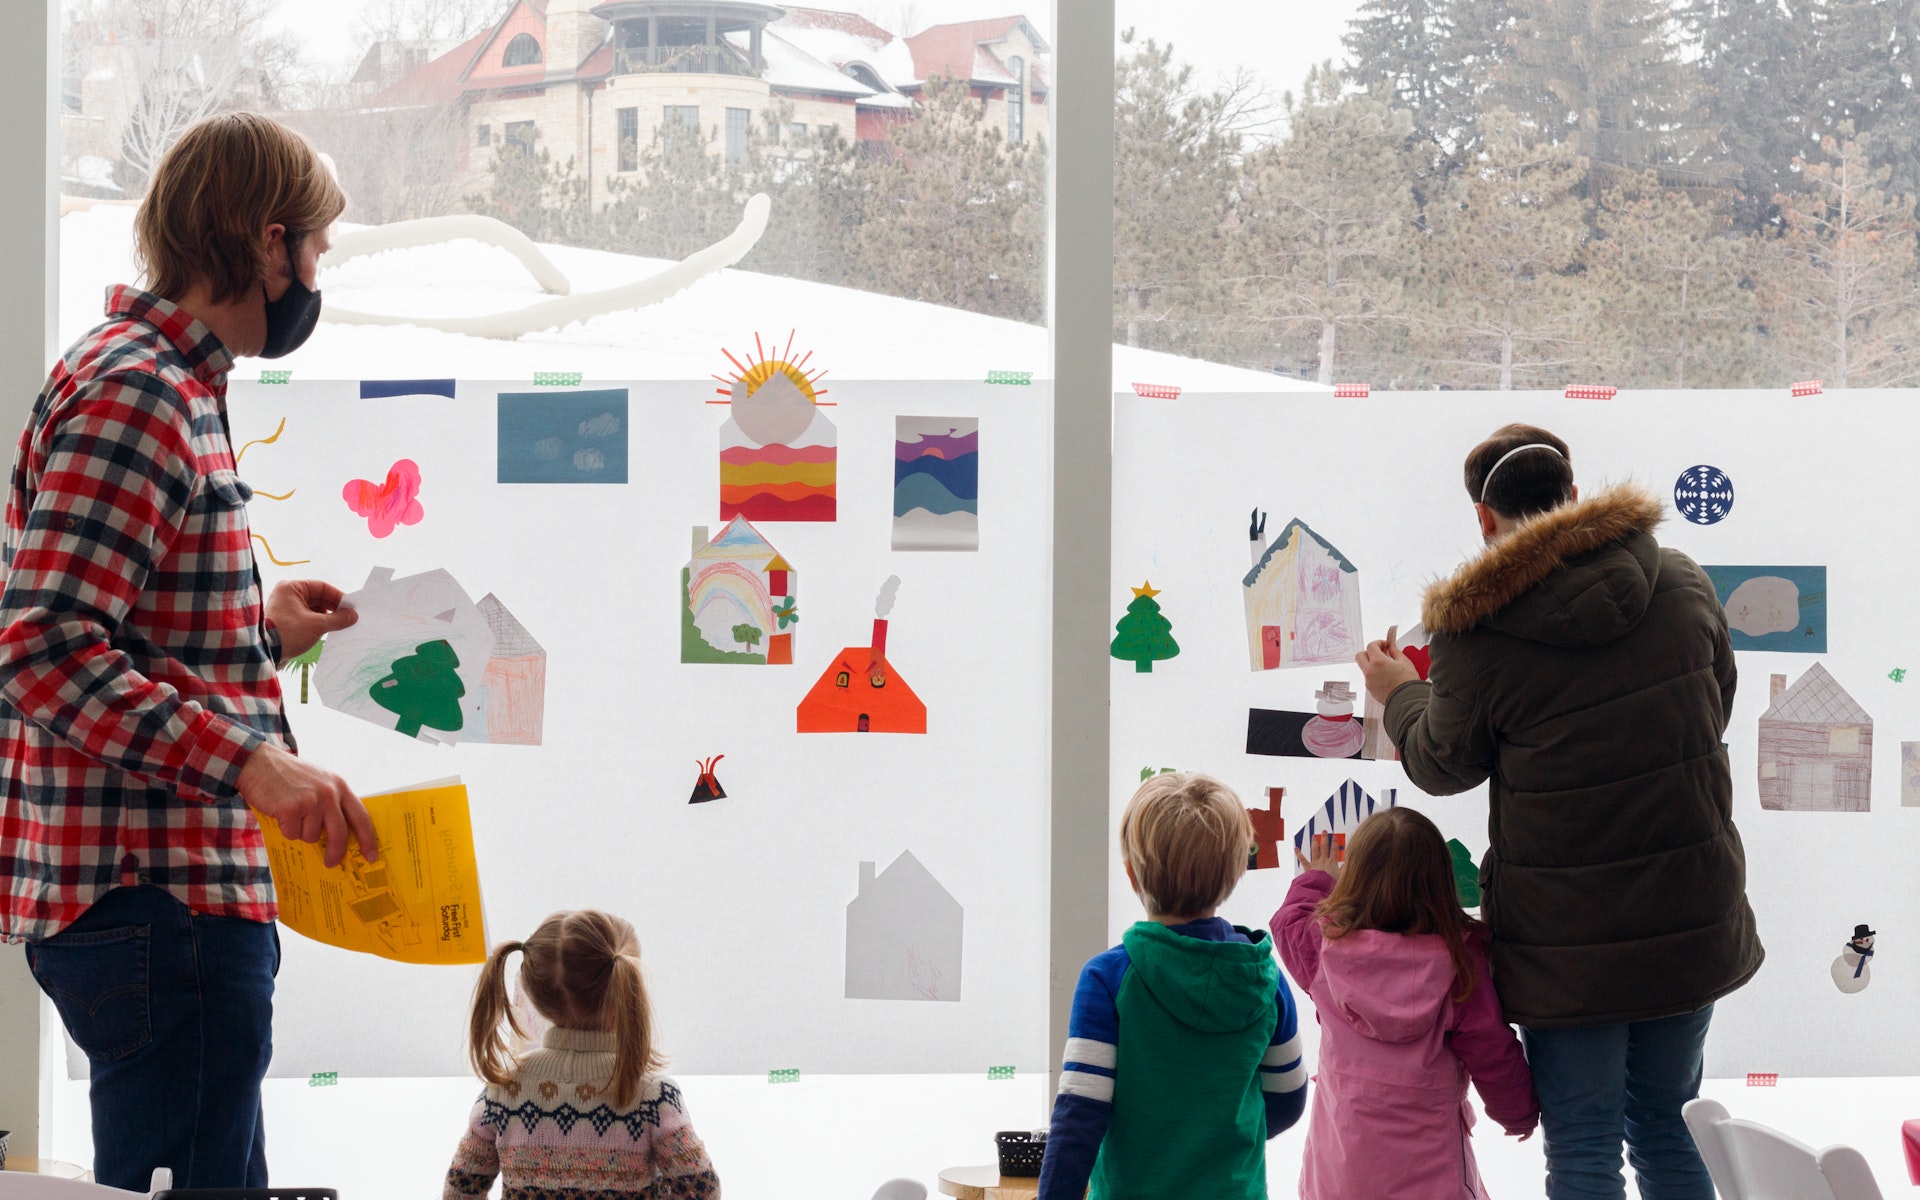 Adults and children adding artwork to a collaborative artwork hung on a window with a snowy hillside visible behind the window